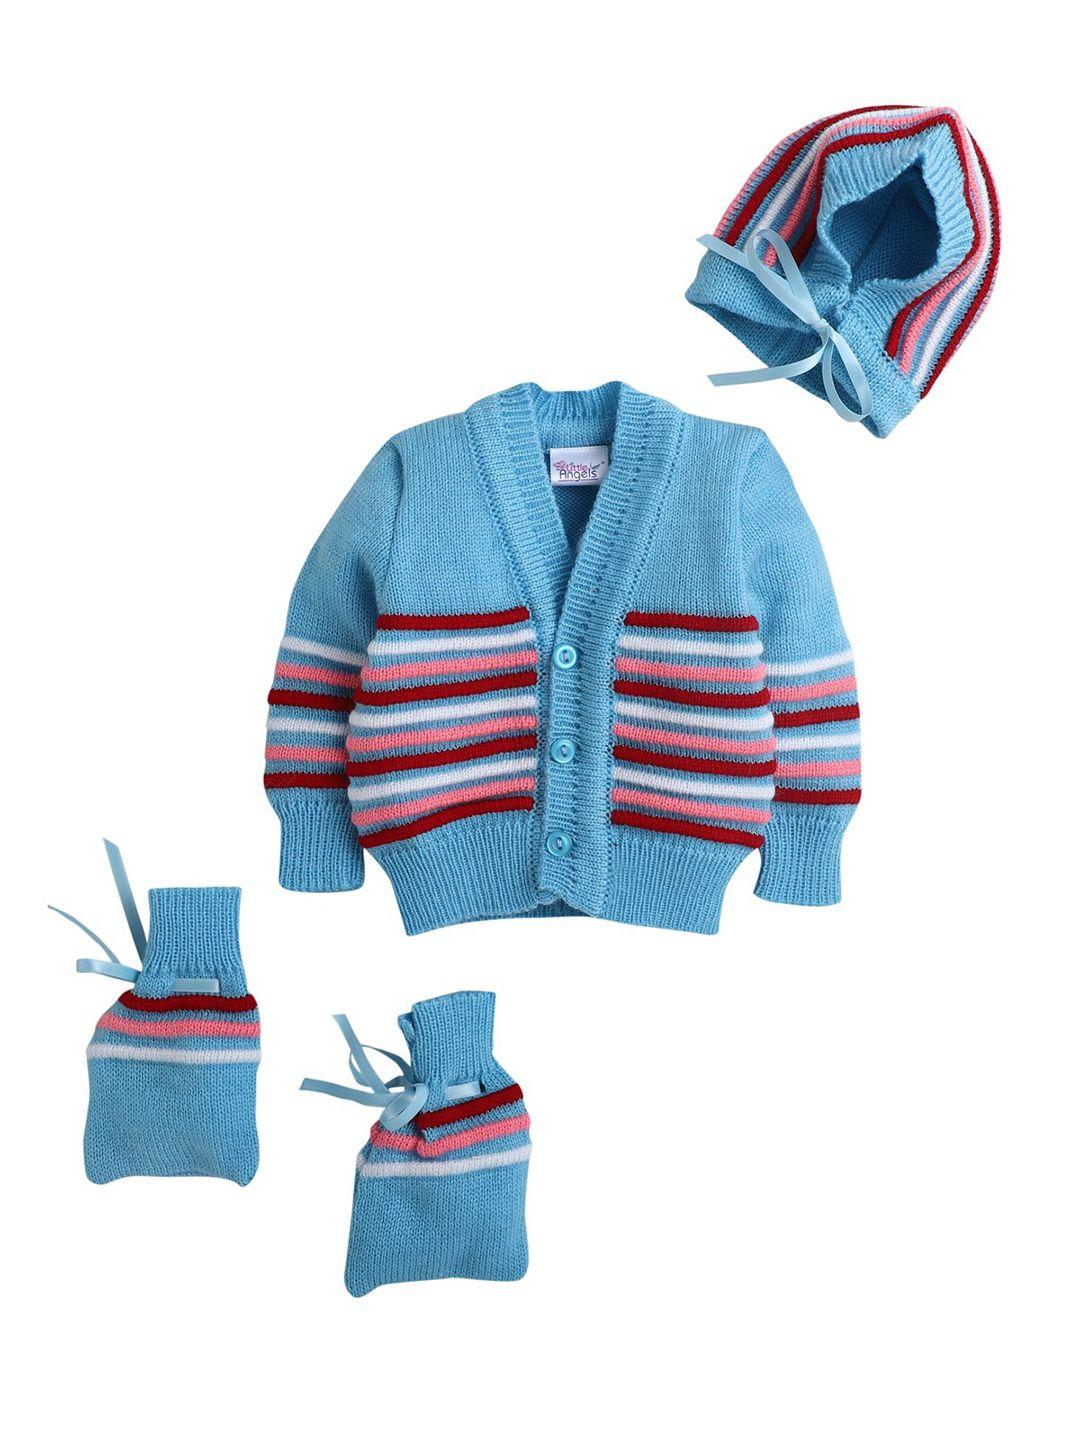 little angels boys blue & maroon cable knit cardigan matching cap and socks